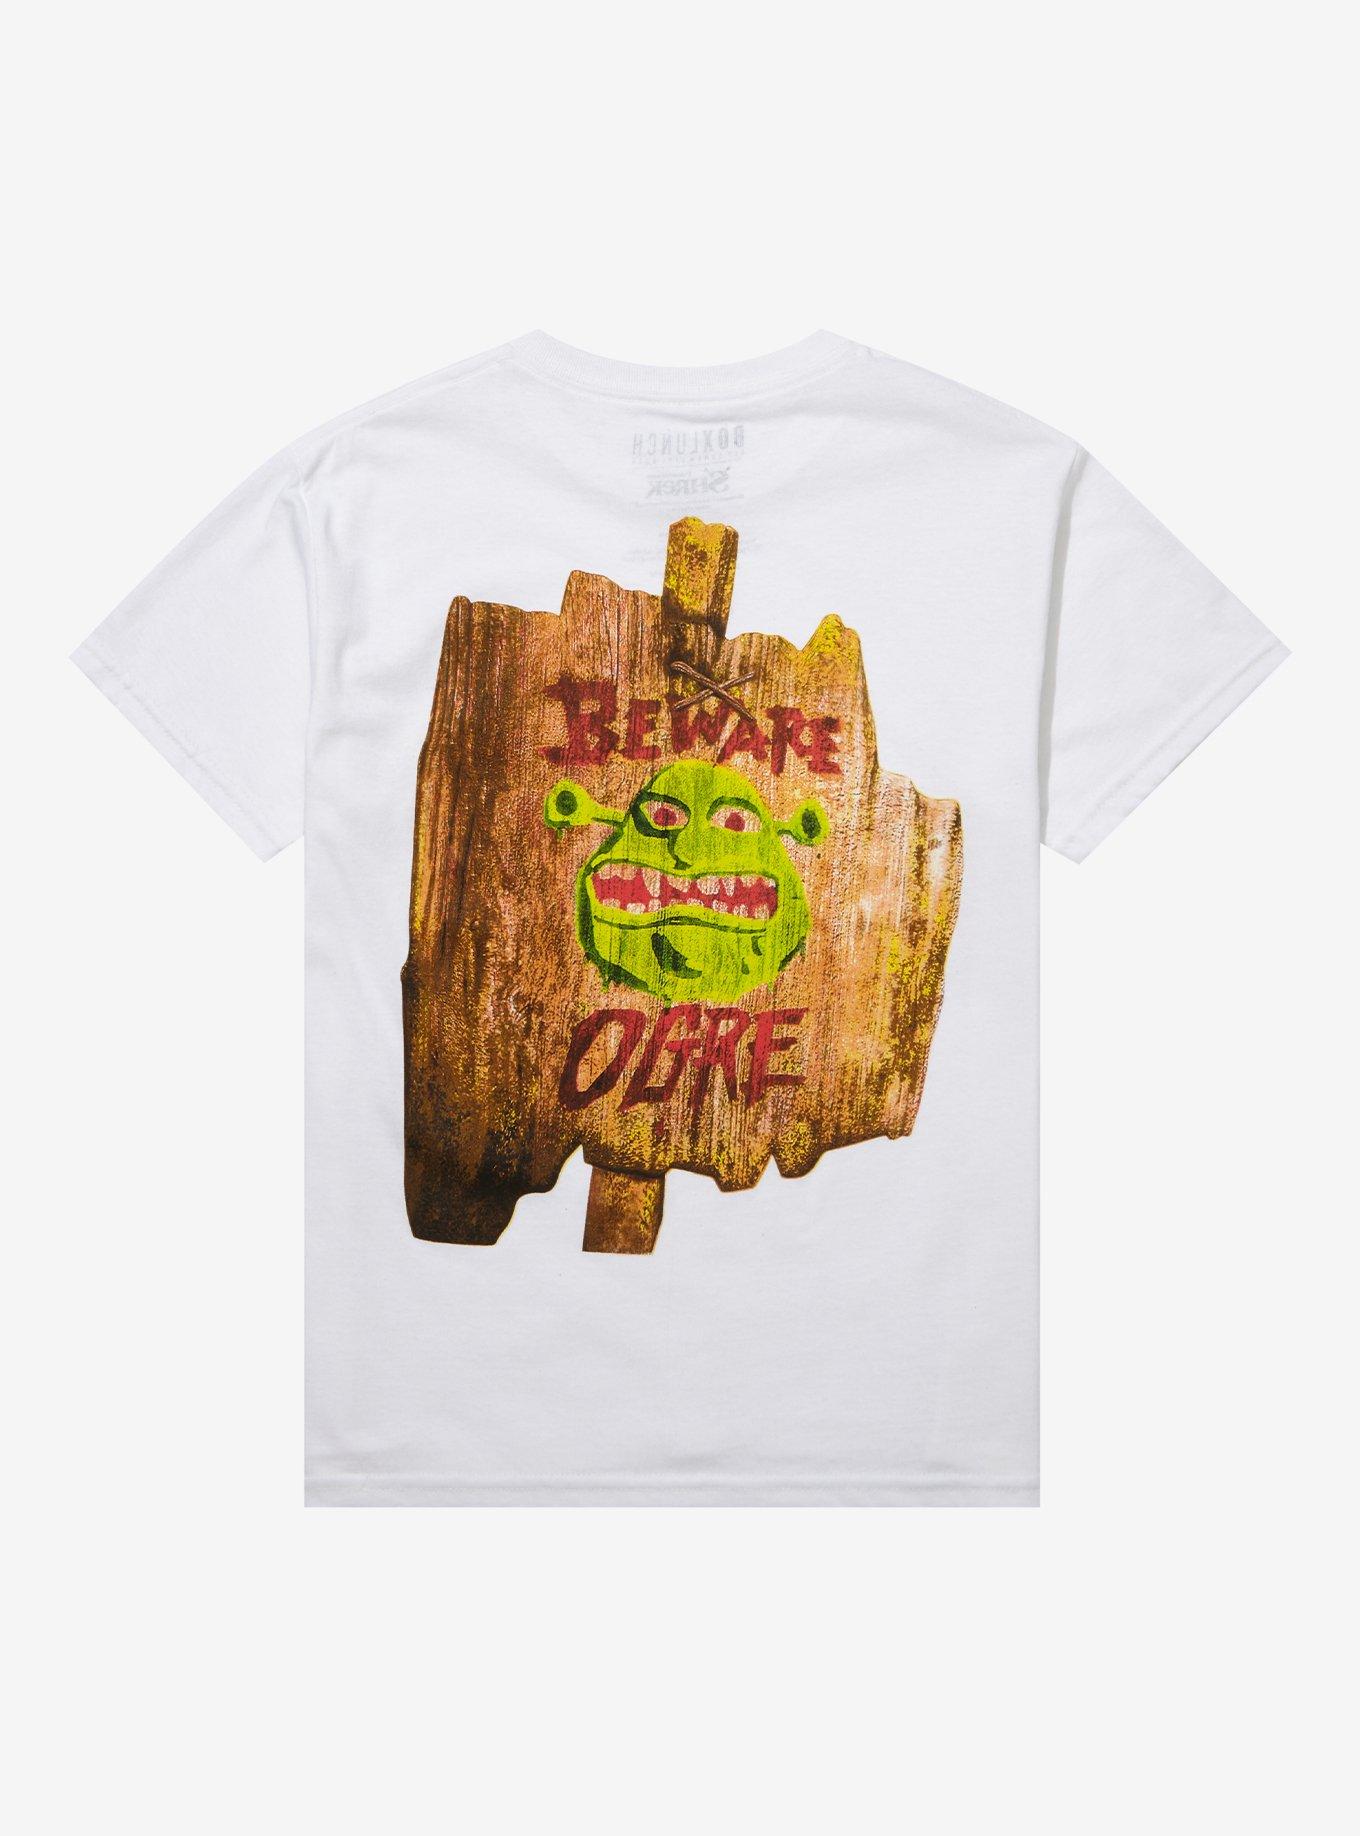 Shrek Beware of Ogre Sign Youth T-Shirt - BoxLunch Exclusive, OFF WHITE, alternate